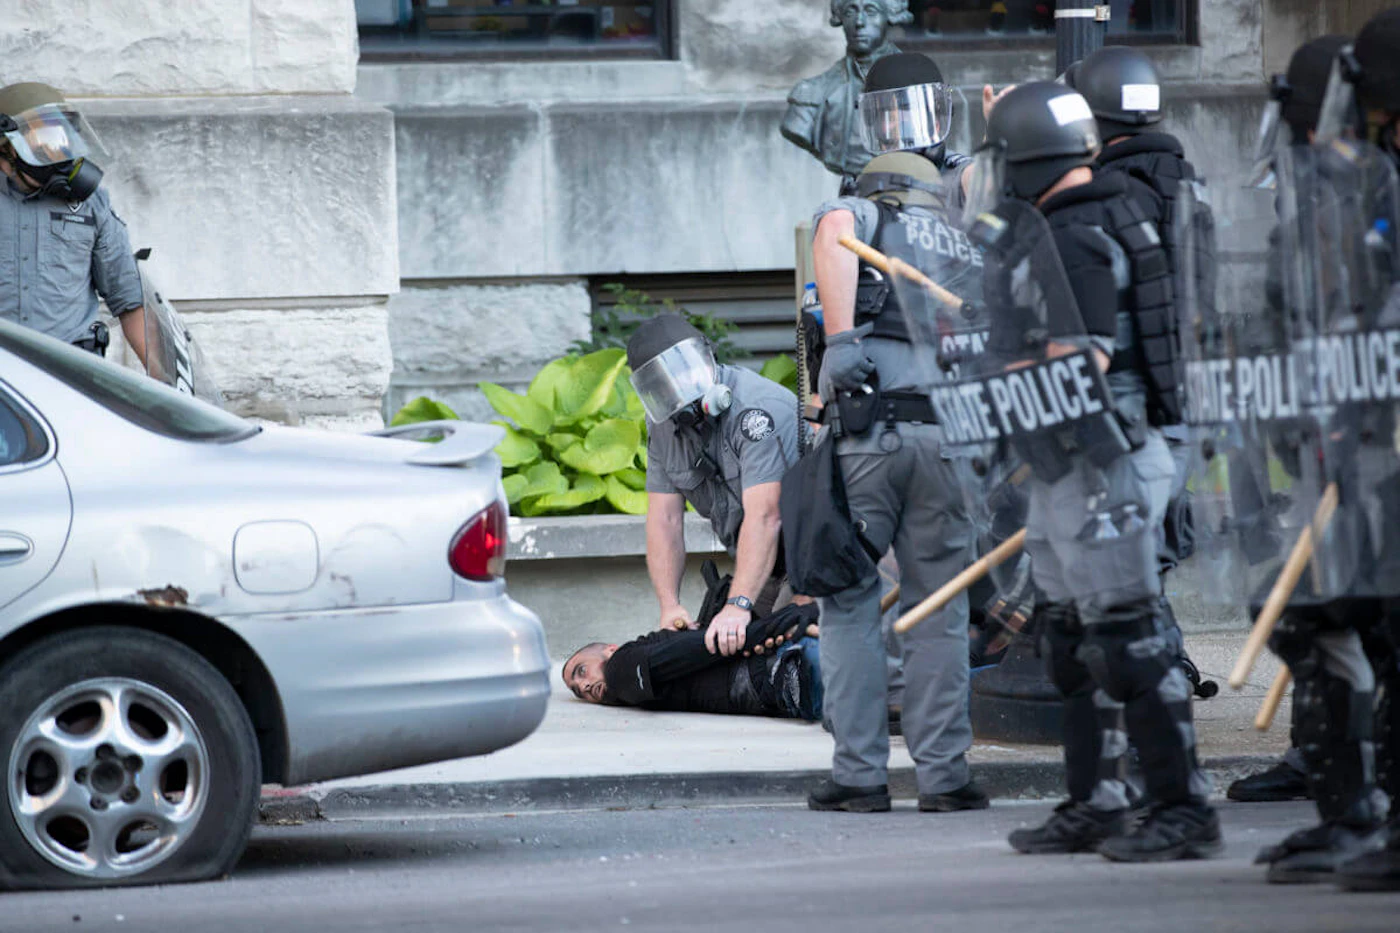 Kentucky State Police detain a man on West Liberty Street on Sunday, May 31, 2020, in downtown Louisville, Kentucky. (Max Gersh/The Courier Journal)